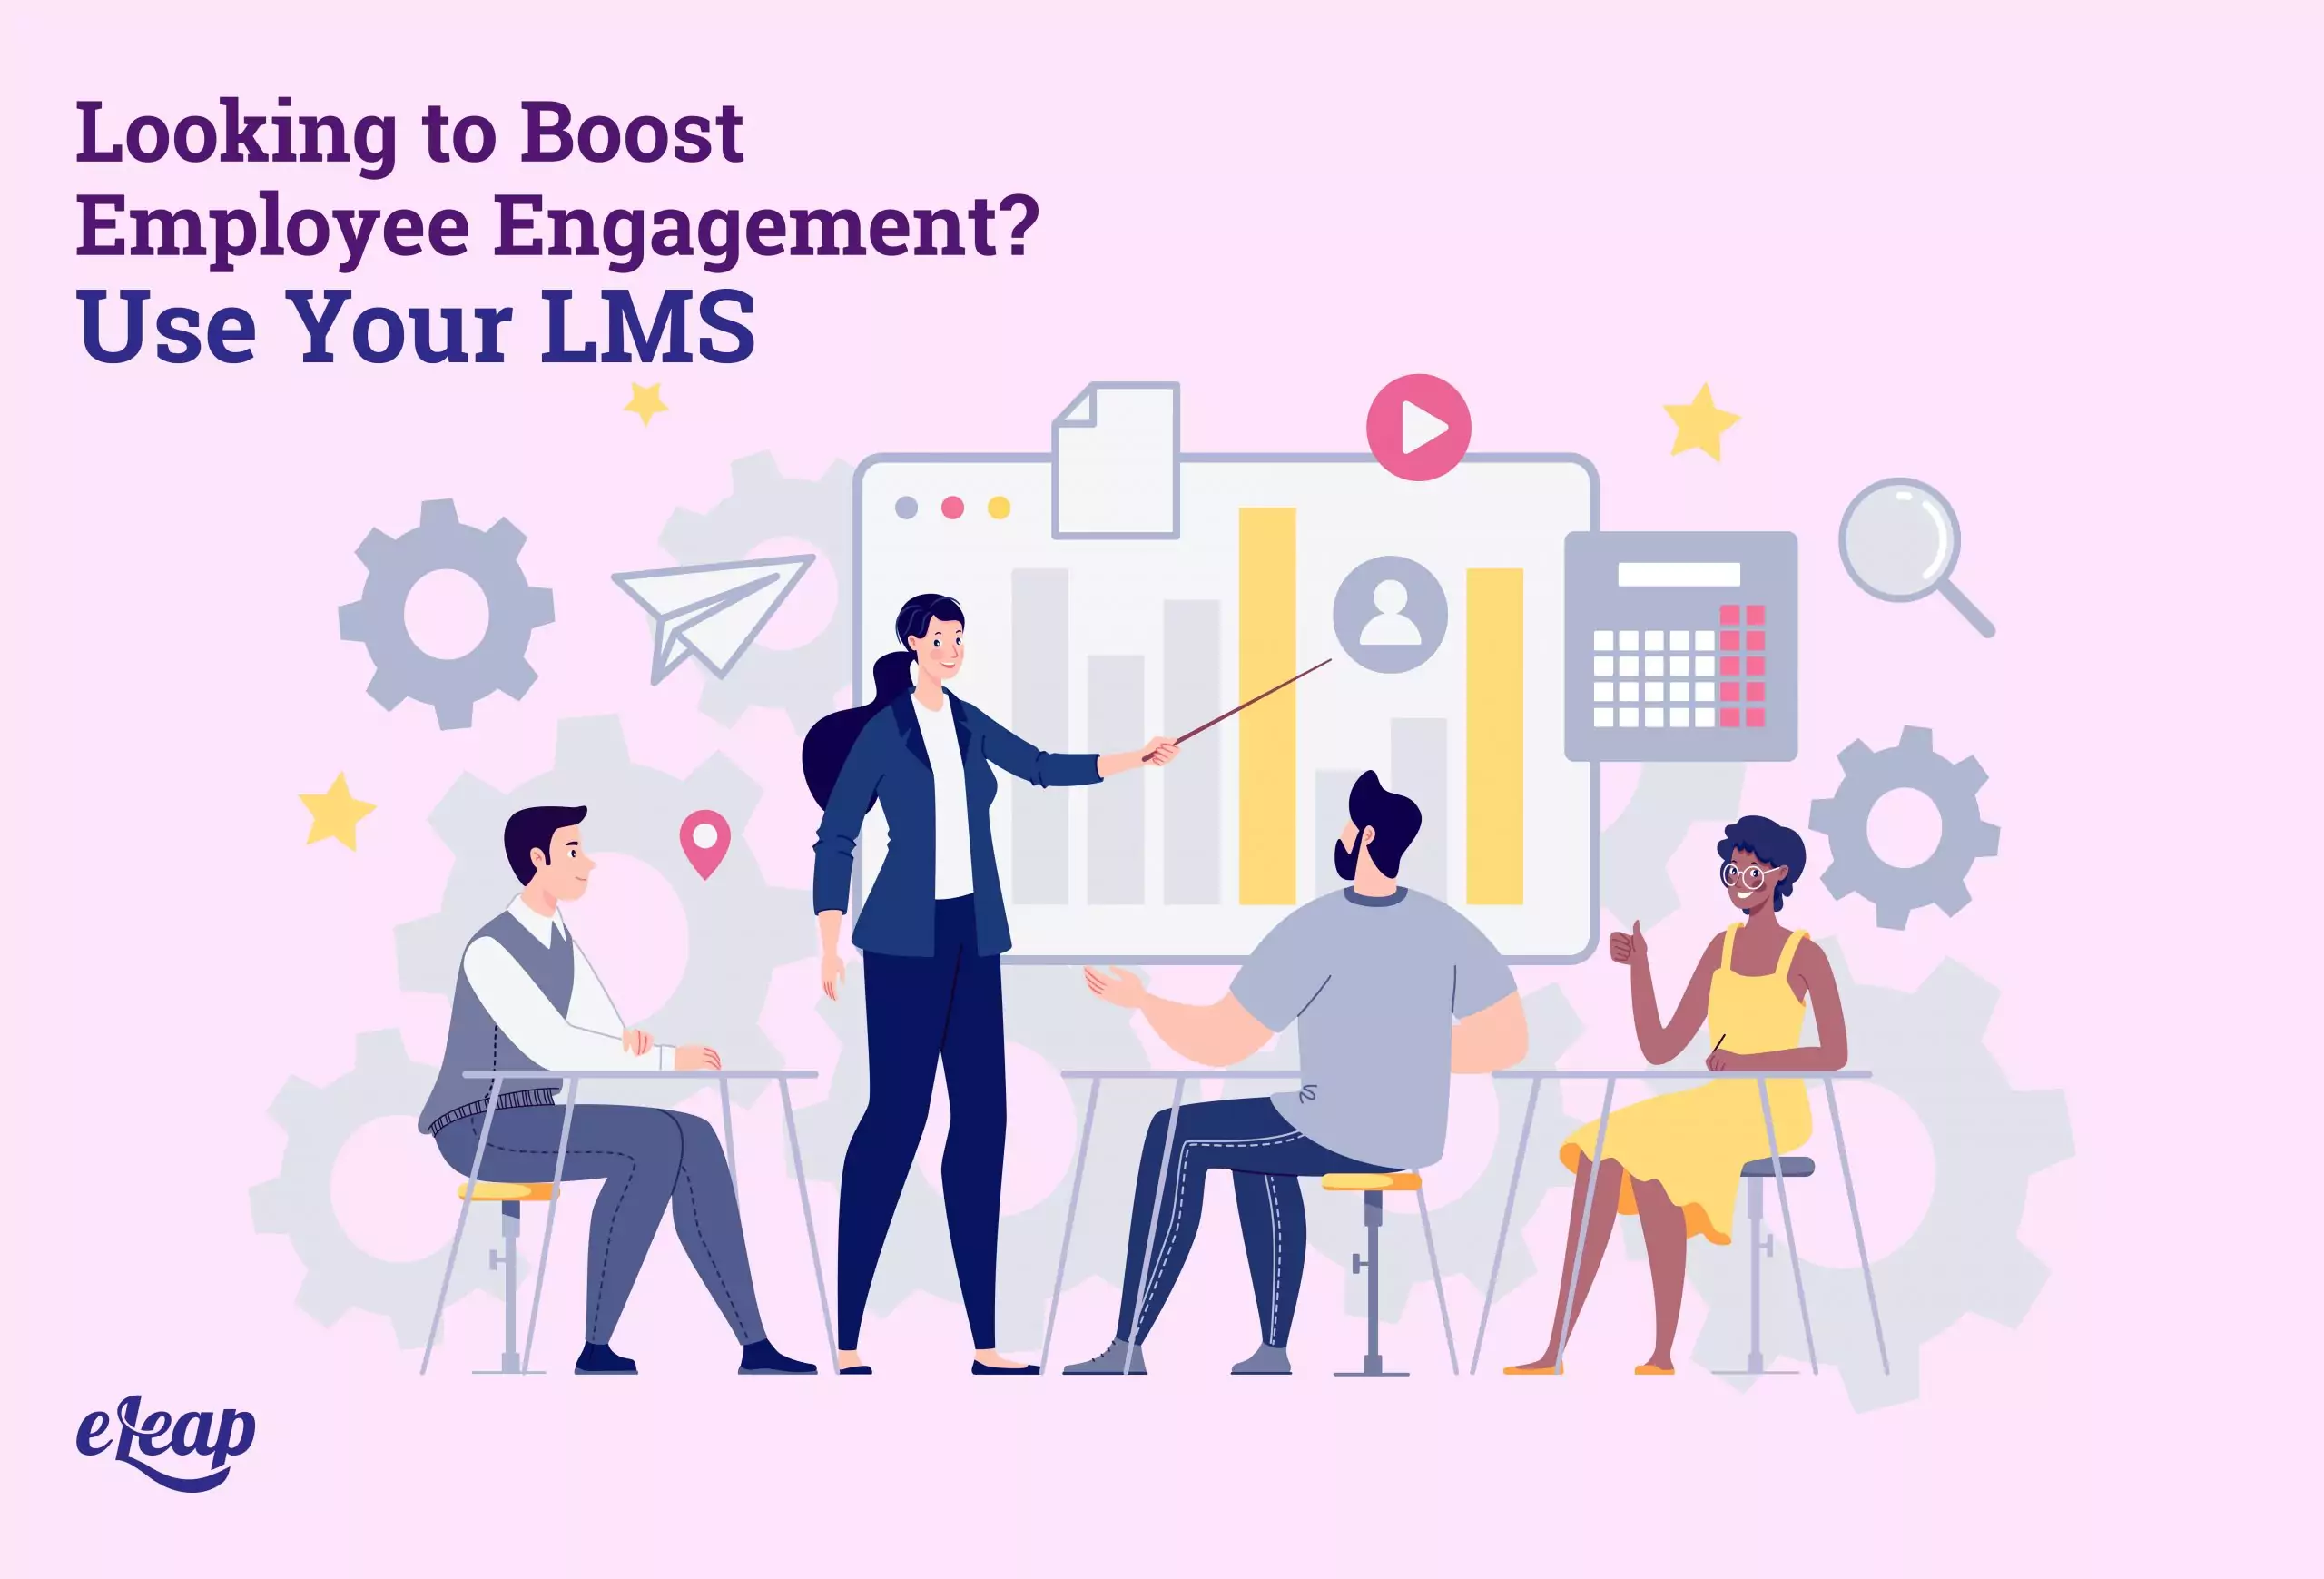 Looking to Boost Employee Engagement? Use Your LMS